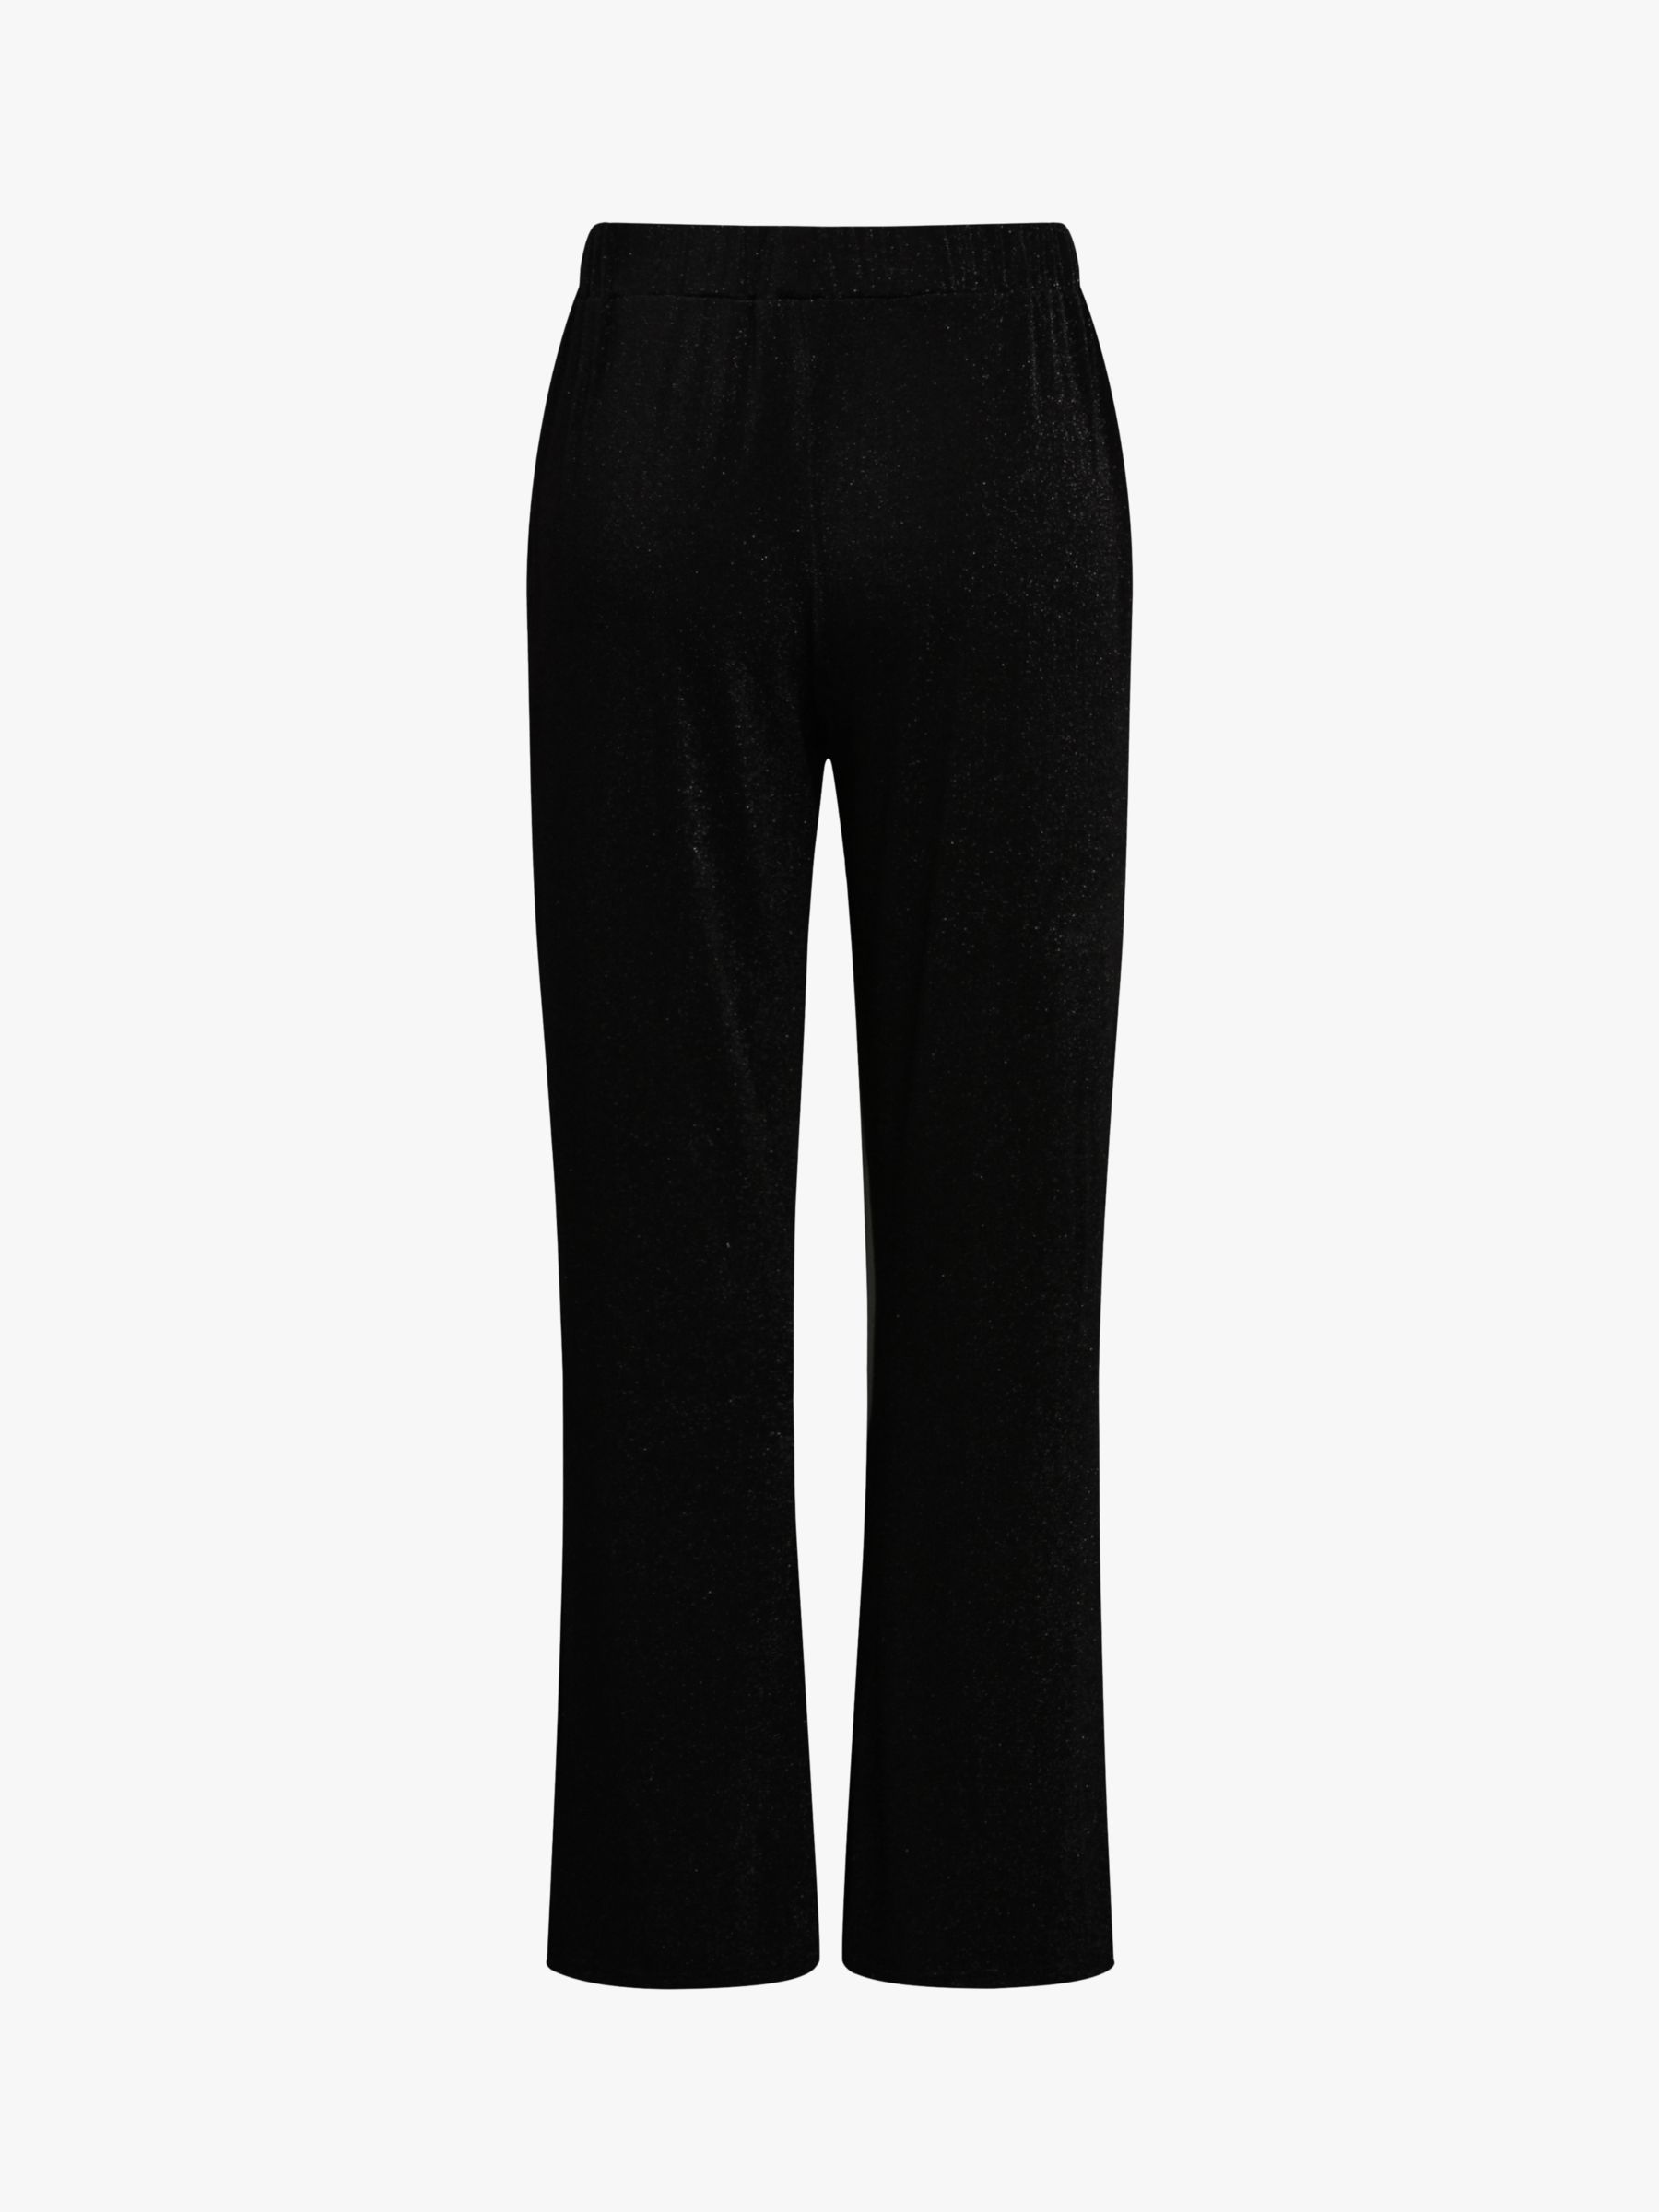 A-VIEW Eva Loose Trousers, Black, 8